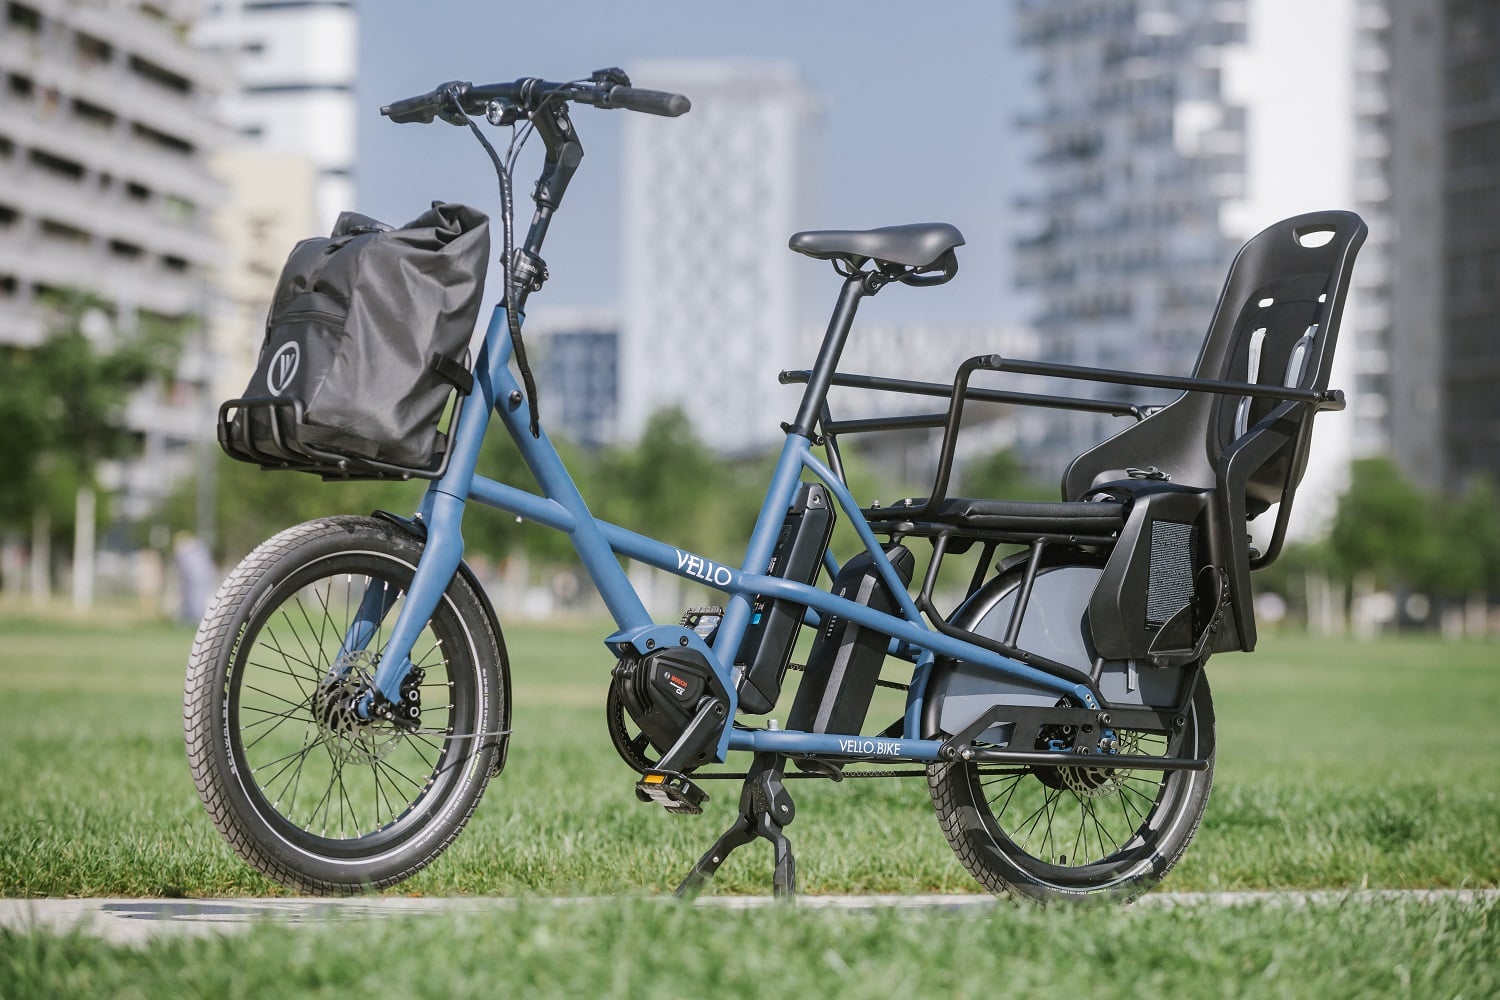 The Vello SUB (smart utility bike) is a lightweight e-cargo bike tailored for city living